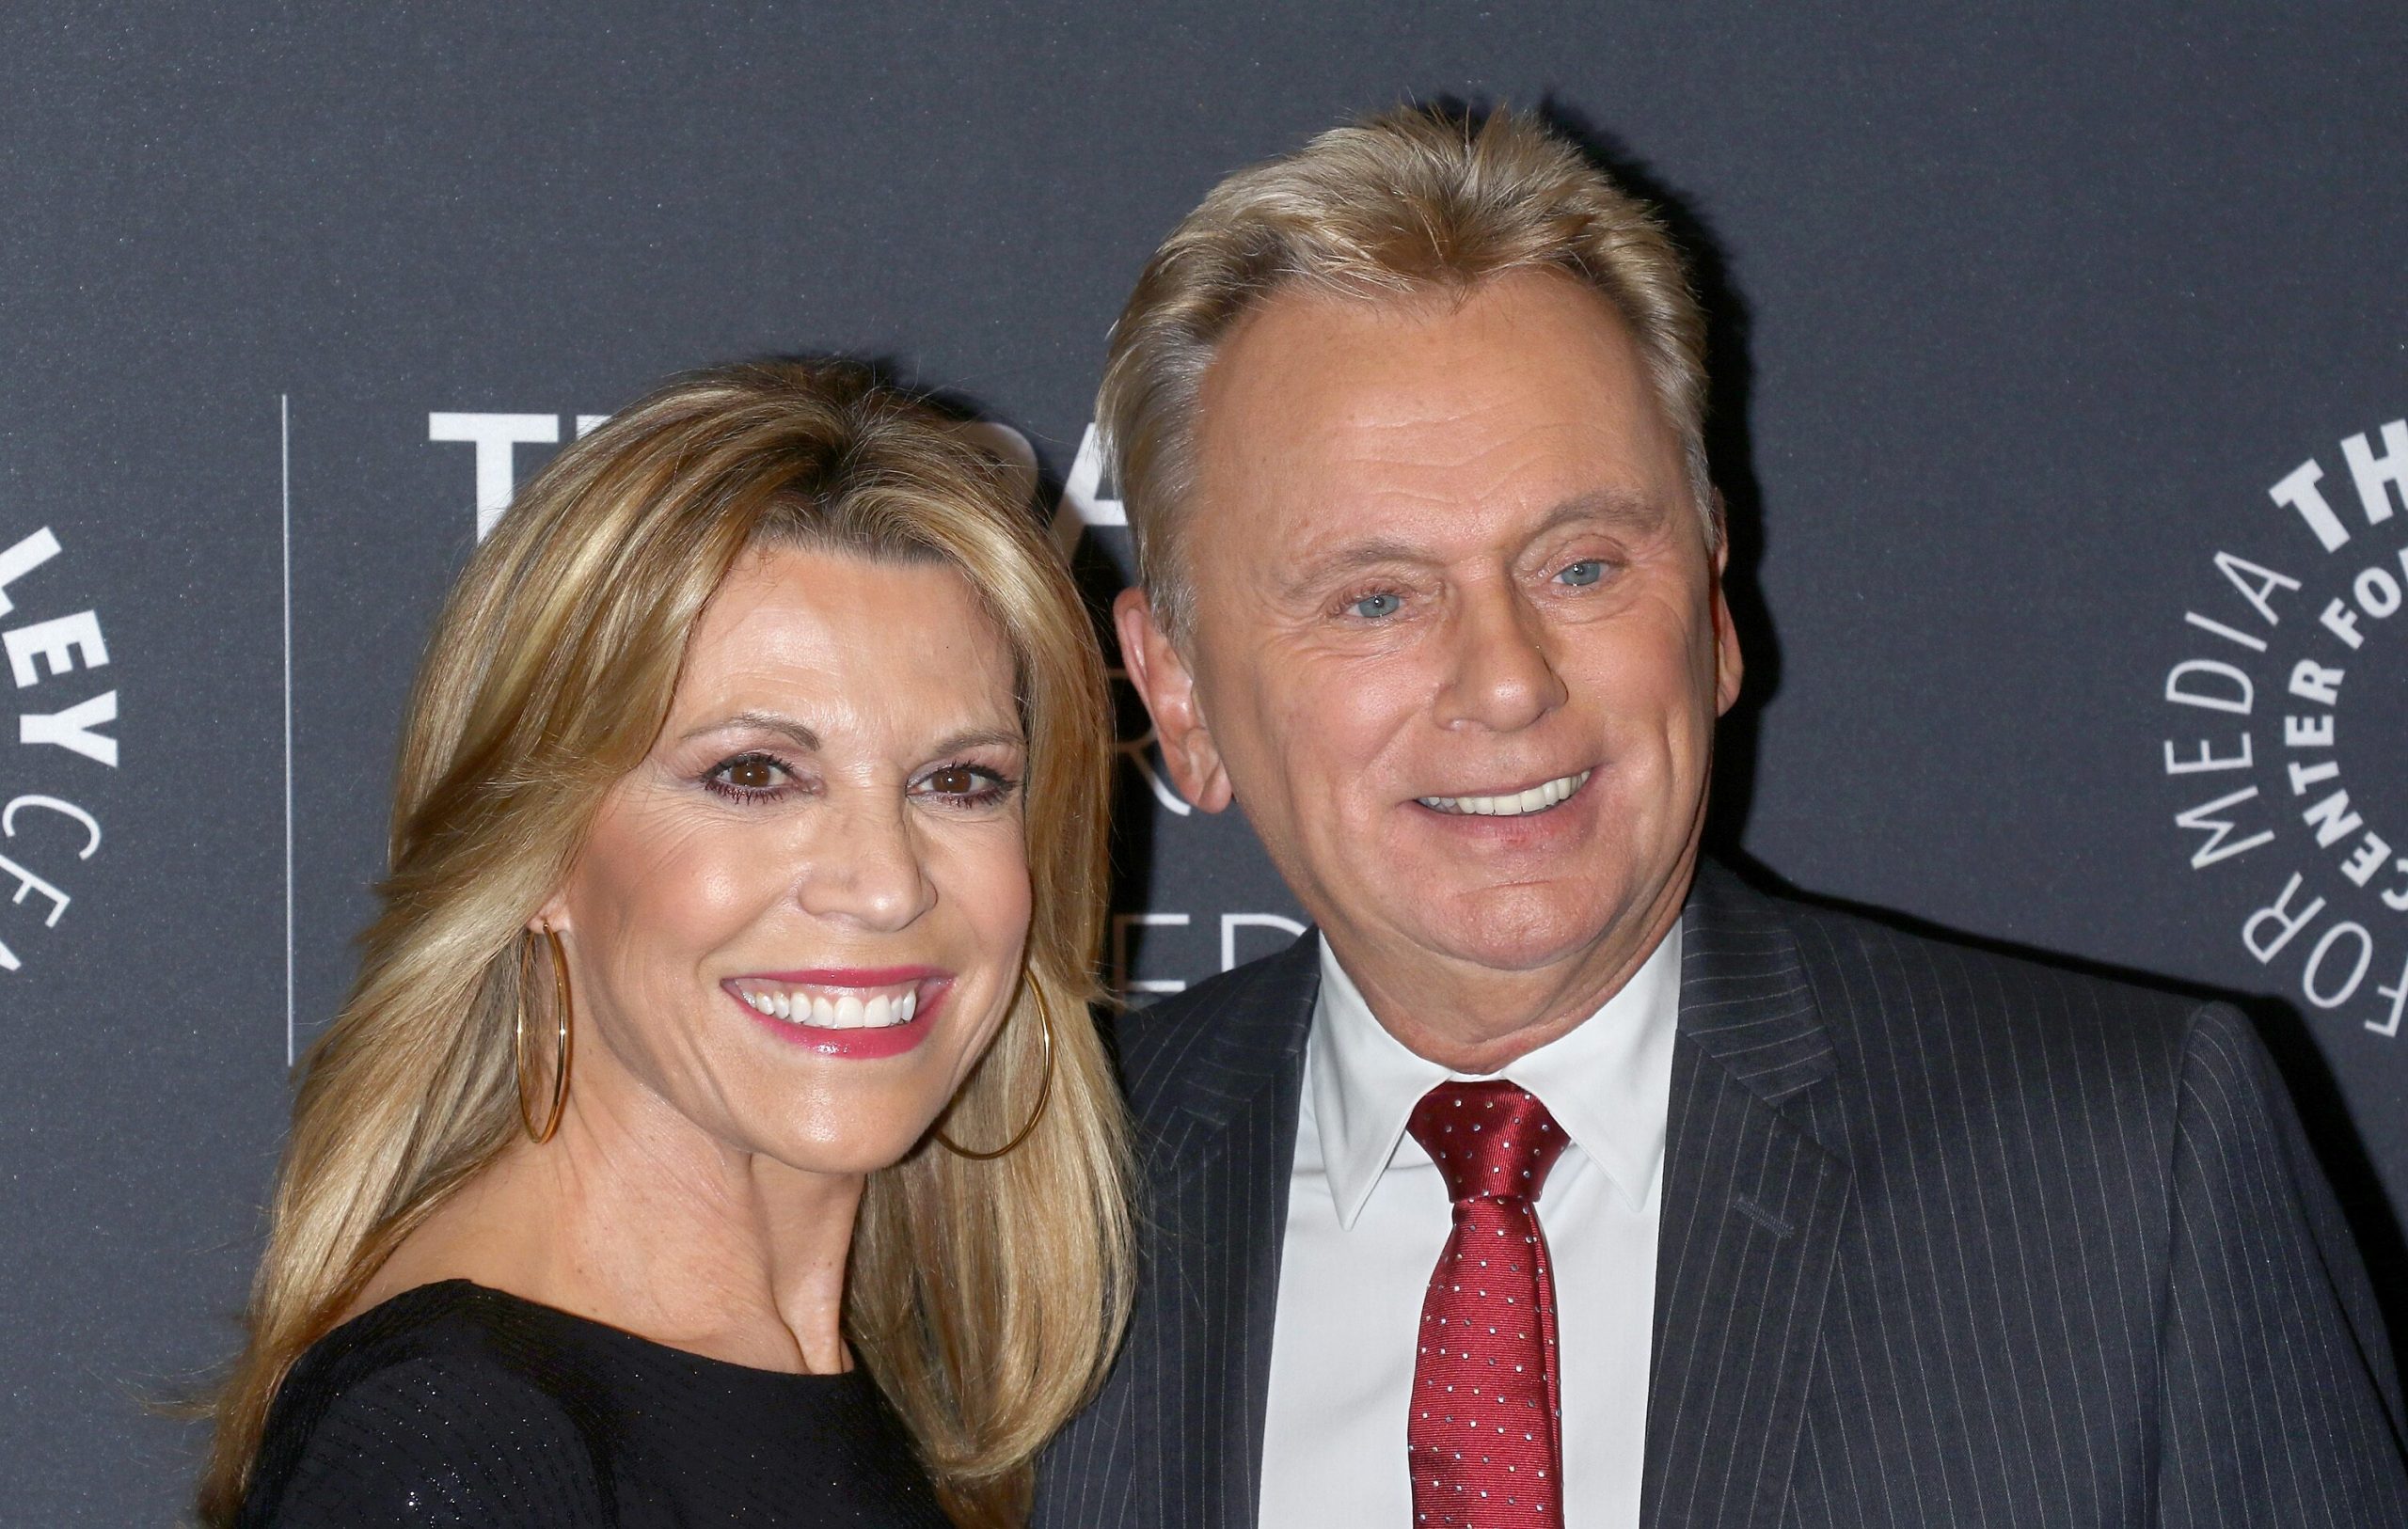 'Celebrity Wheel of Fortune' appears on ABC with Pat Sajak and Vanna White as co-hosts

